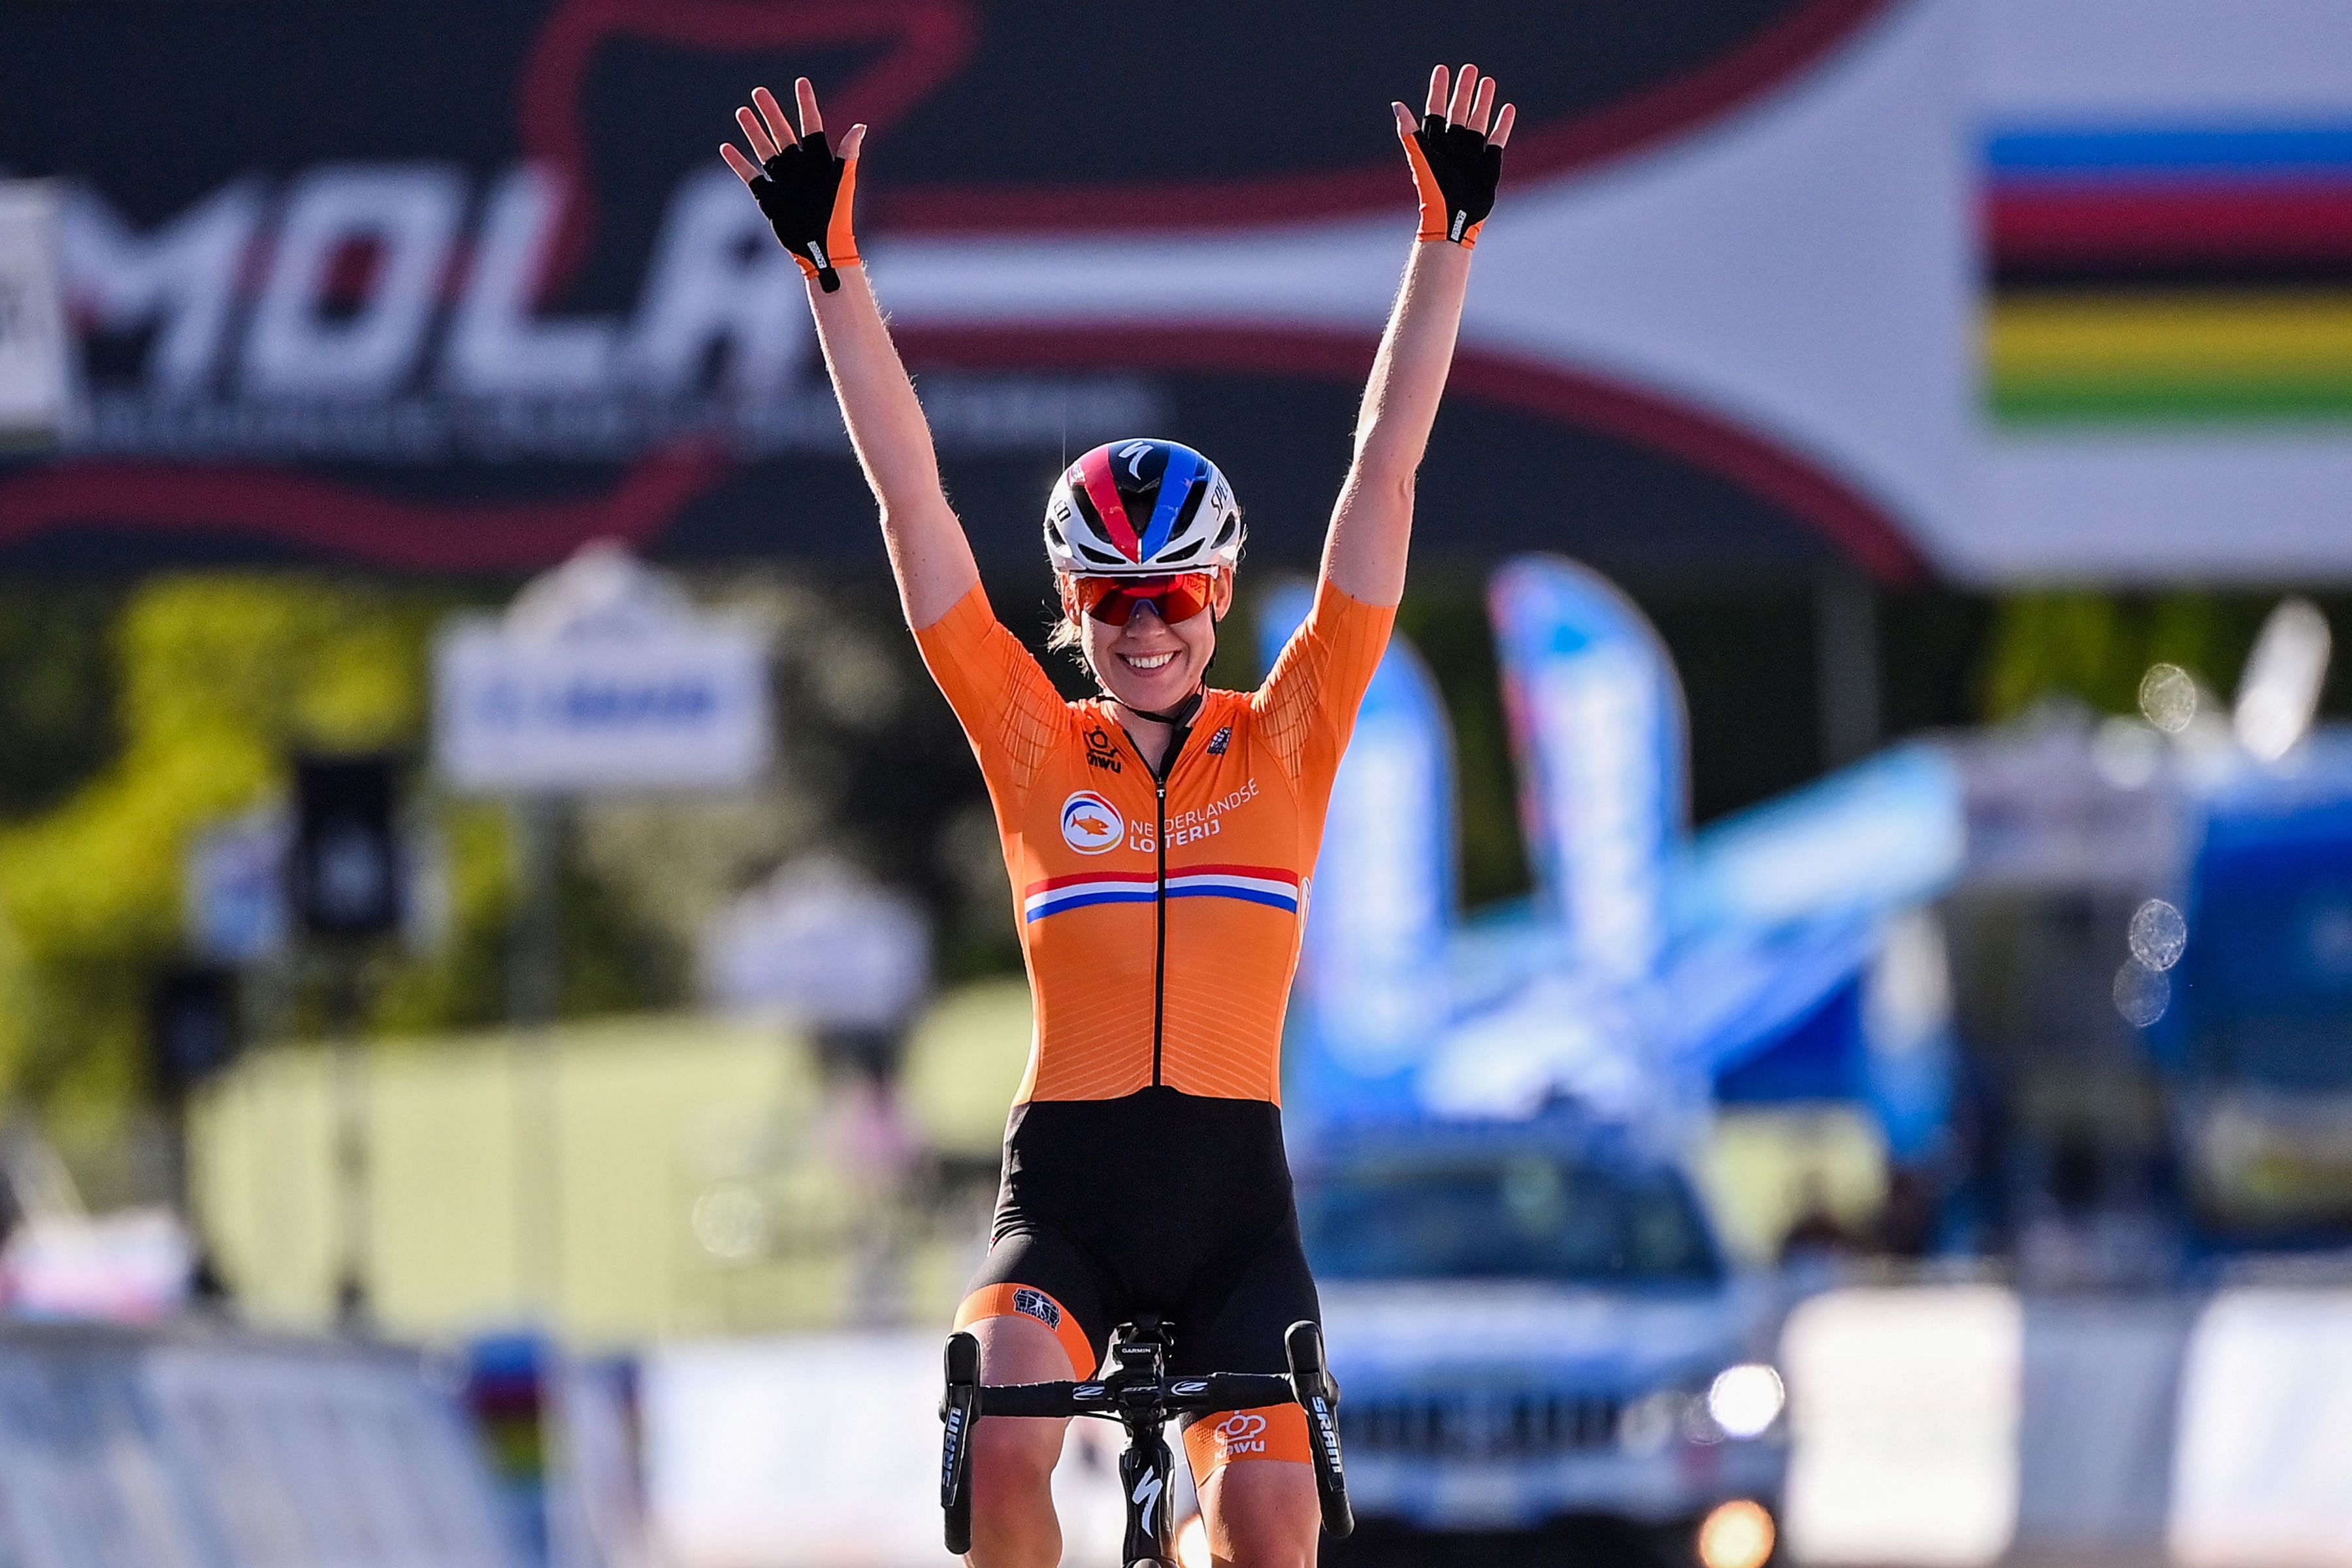 Netherlands' Anna van der Breggen celebrates as she crosses the finish line to win the Women's Elite Road Race, a 143-kilometer route around Imola, Emilia-Romagna, Italy, on September 26, 2020 as part of the UCI 2020 Road World Championships. Credit: AFP